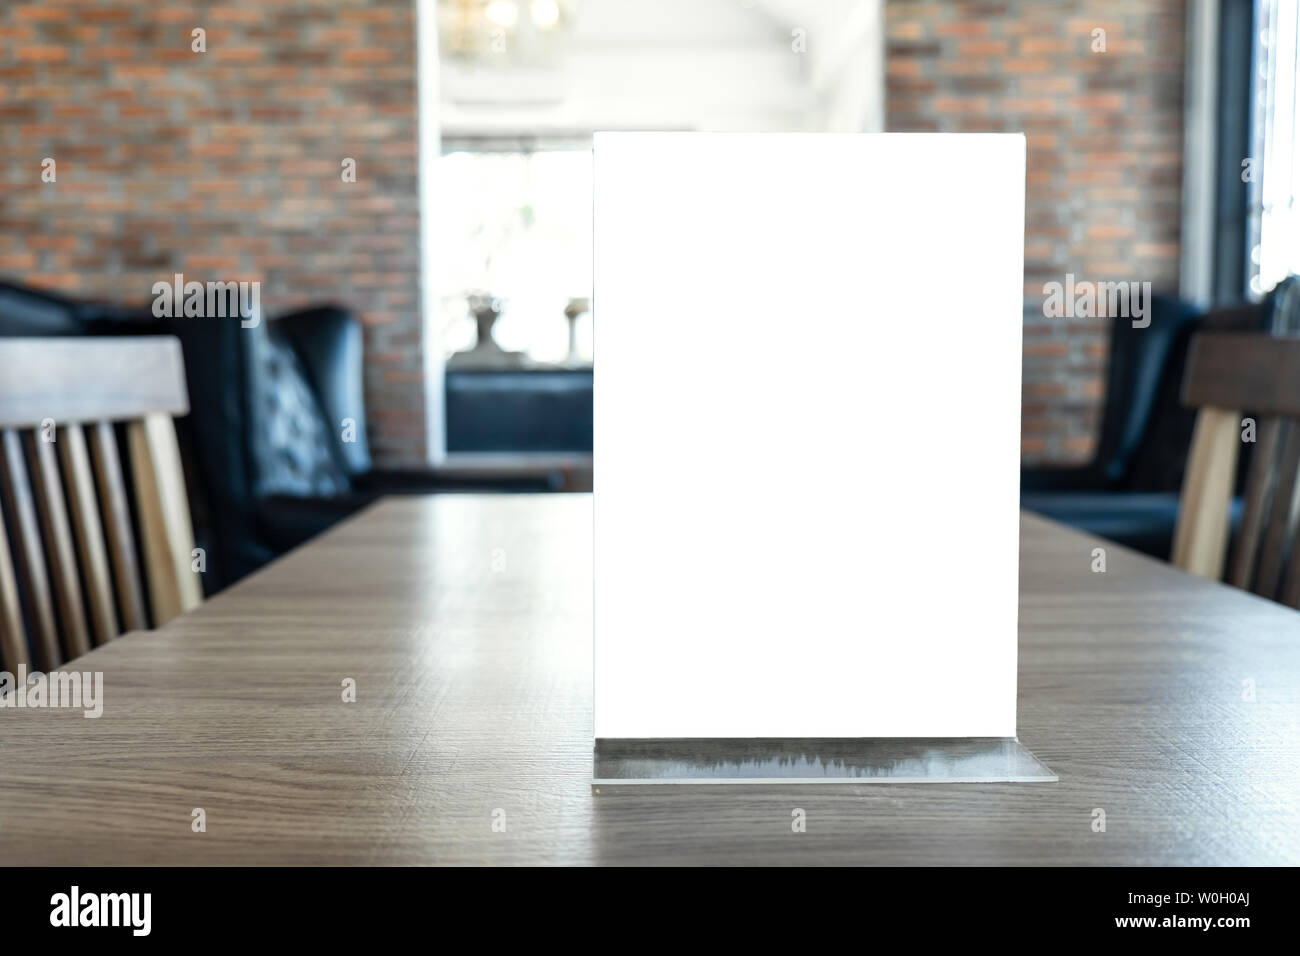 Blank screen mock up menu frame standing on wood table in coffee cafe and restaurant background. Stock Photo